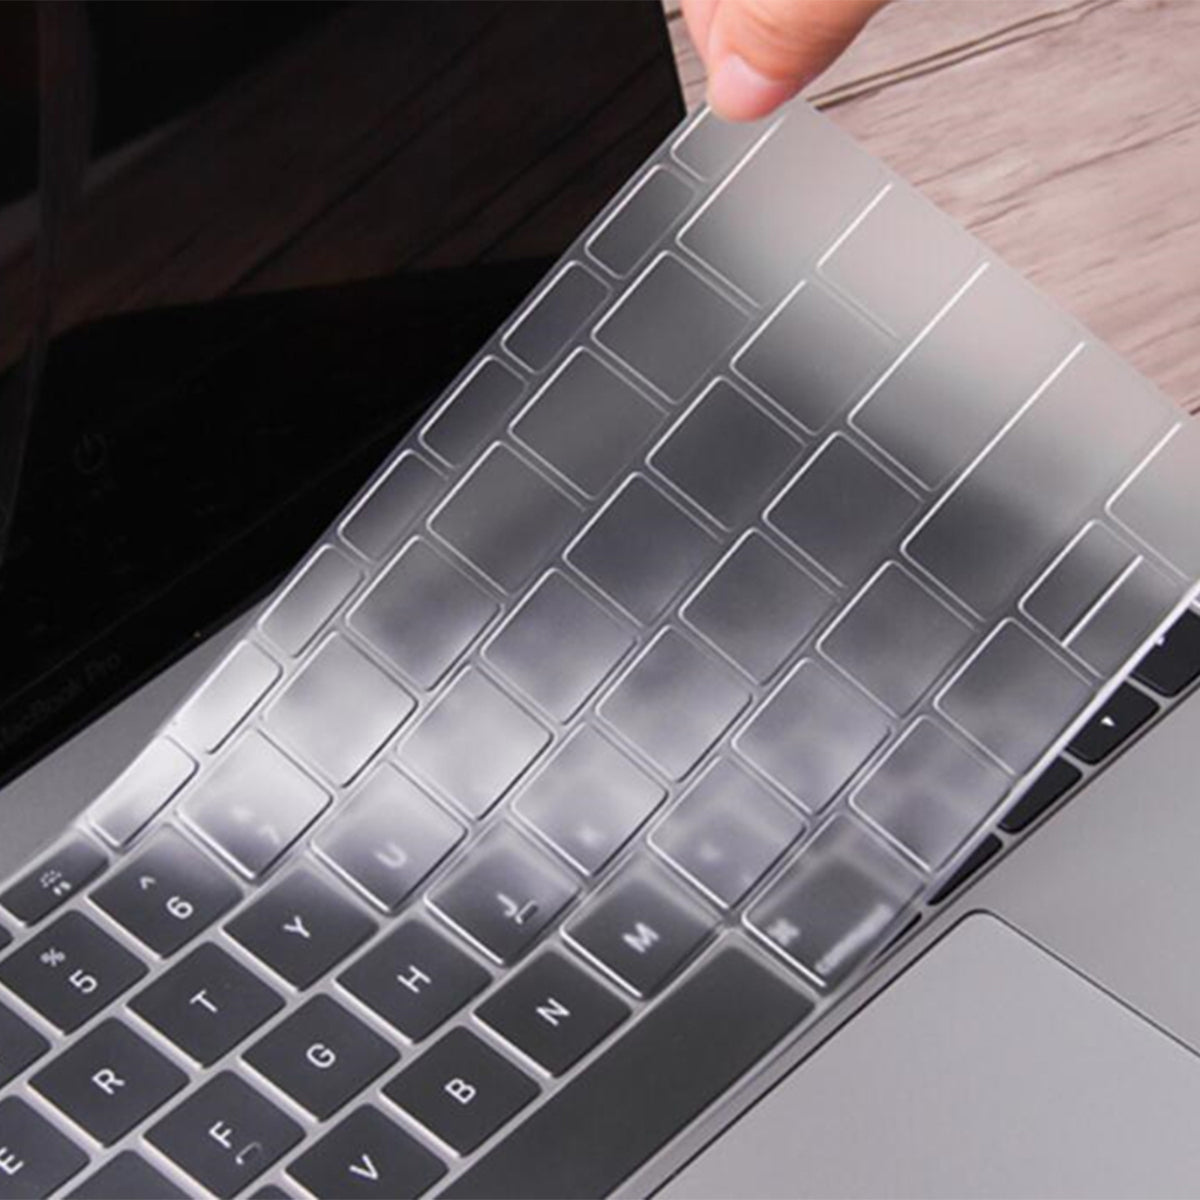 Easy Cleaning Keyboard Protection Film Soft TPU Keyboard Sleeve Covering for MacBook Air 13inch (A1932) 2018